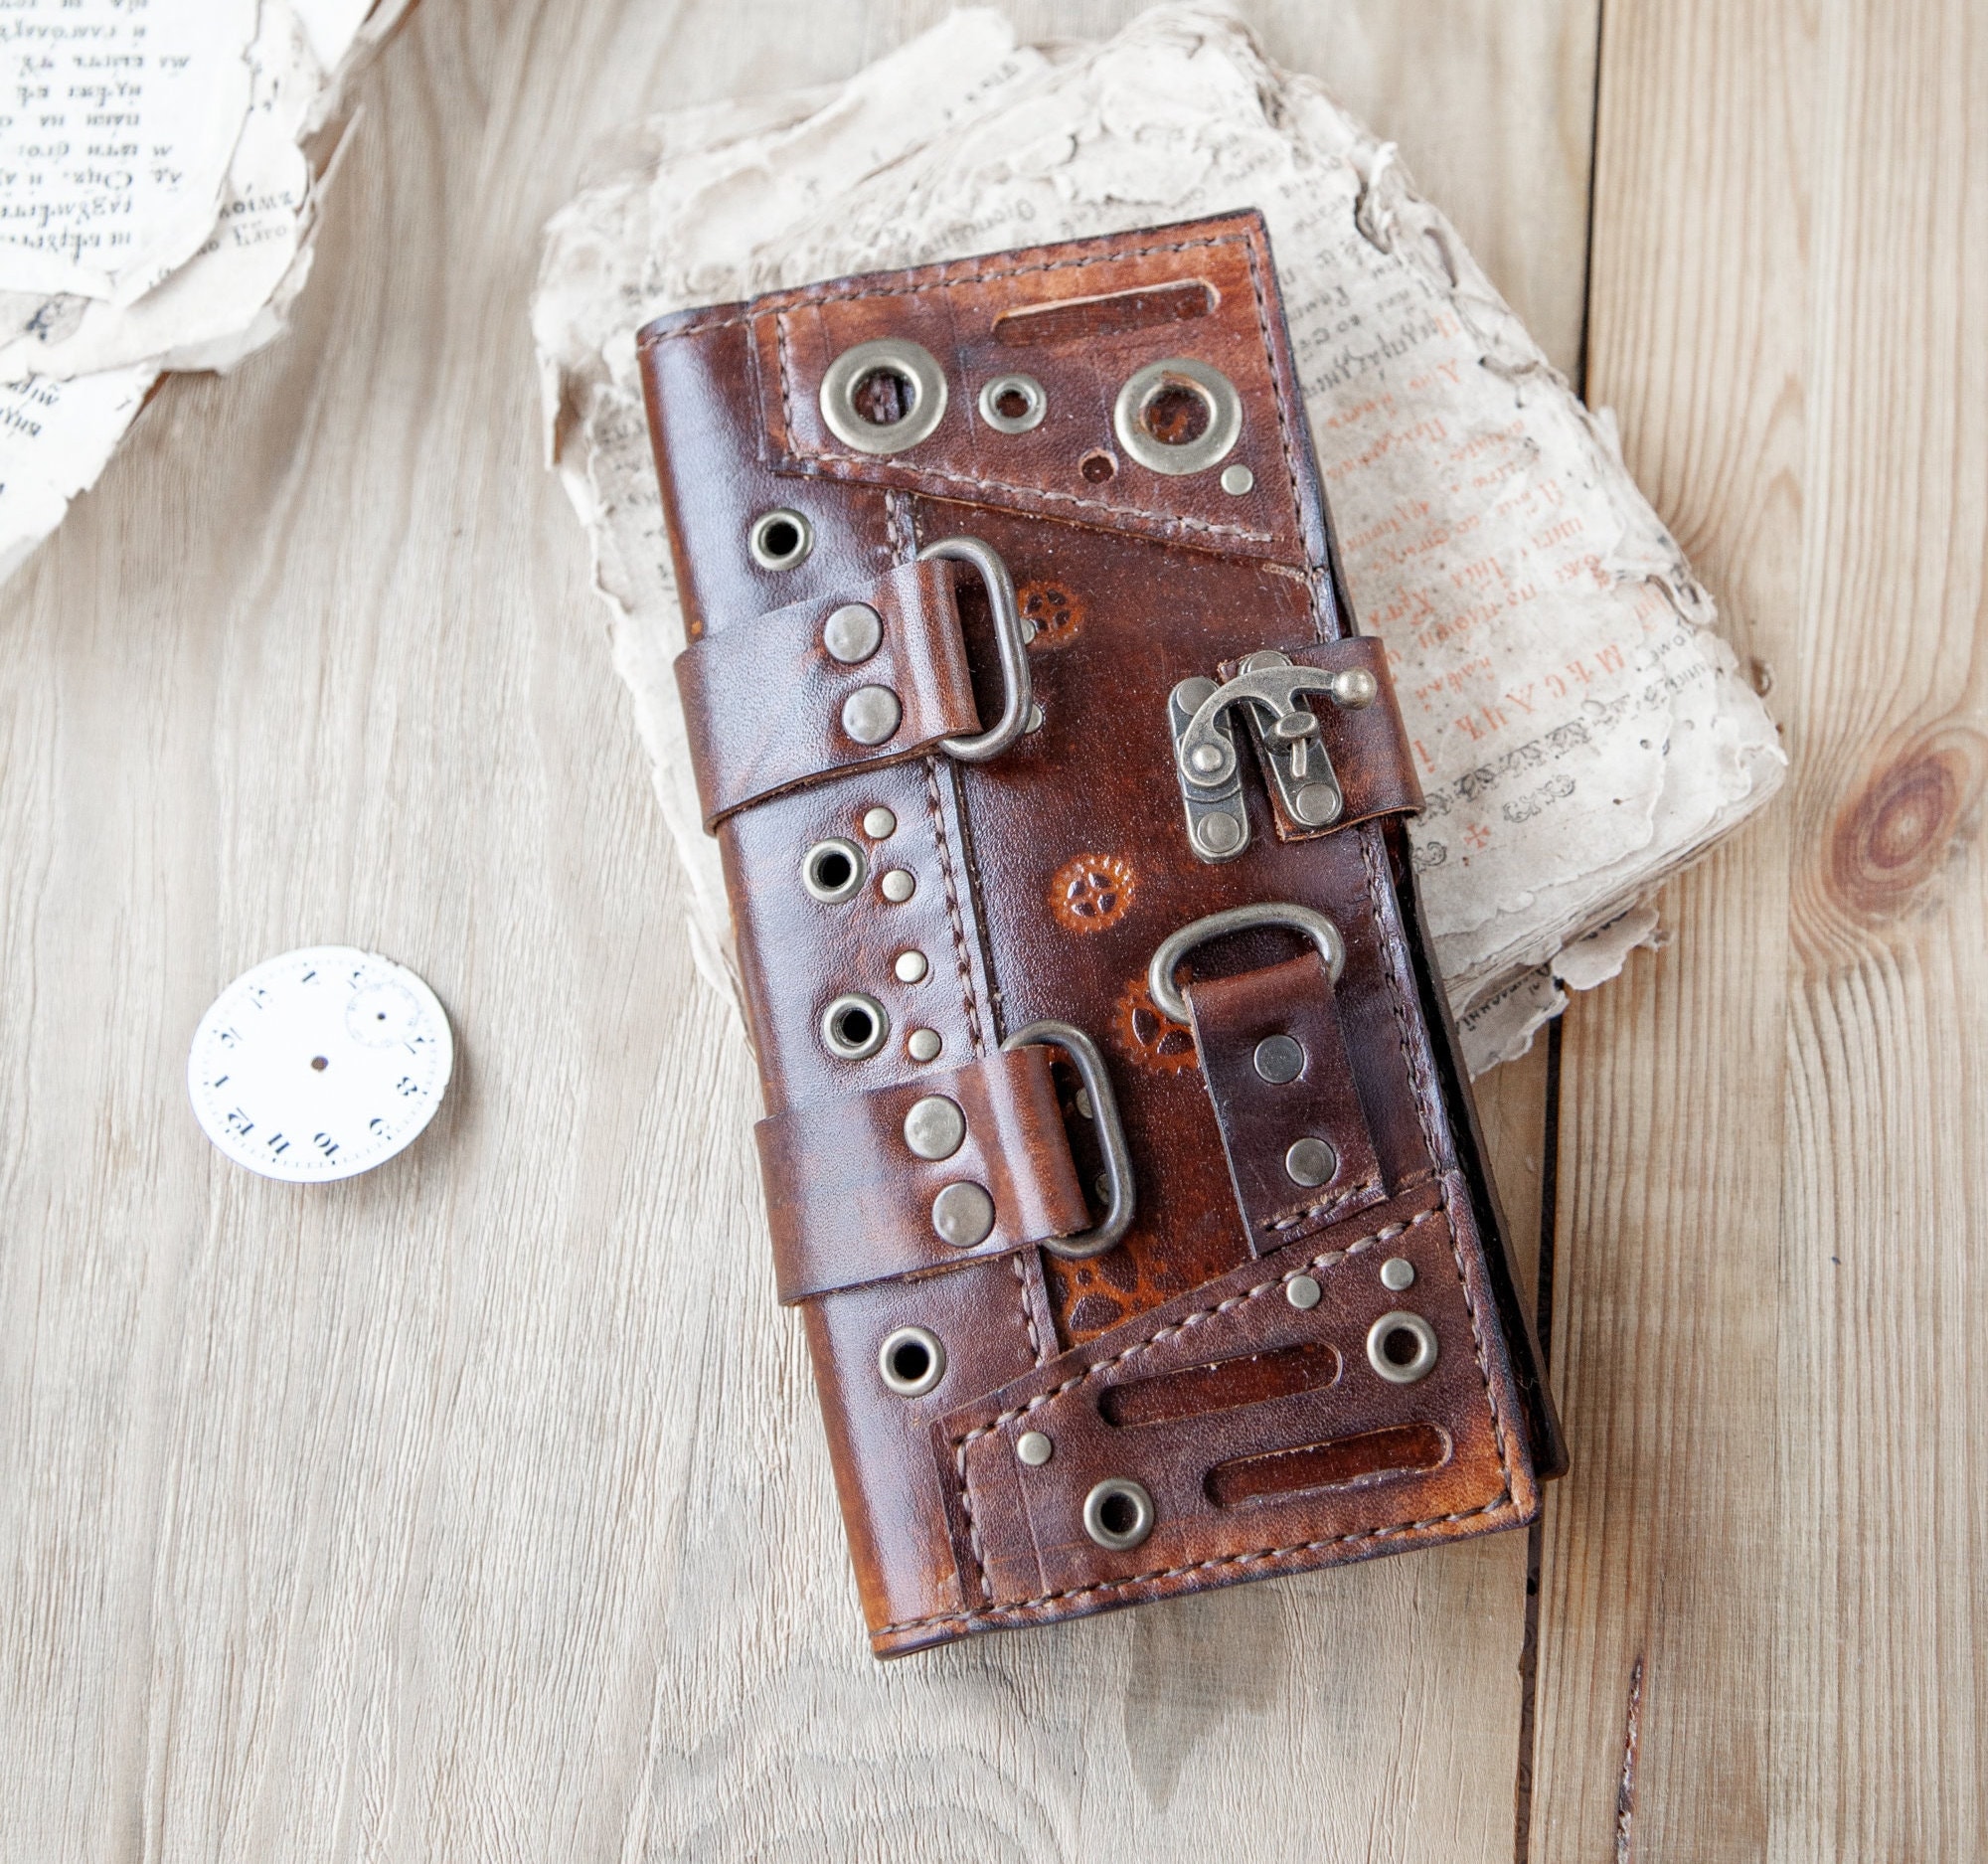 Steampunk Hand Bag Leather Wallet With Parts of a Mechanical Watch